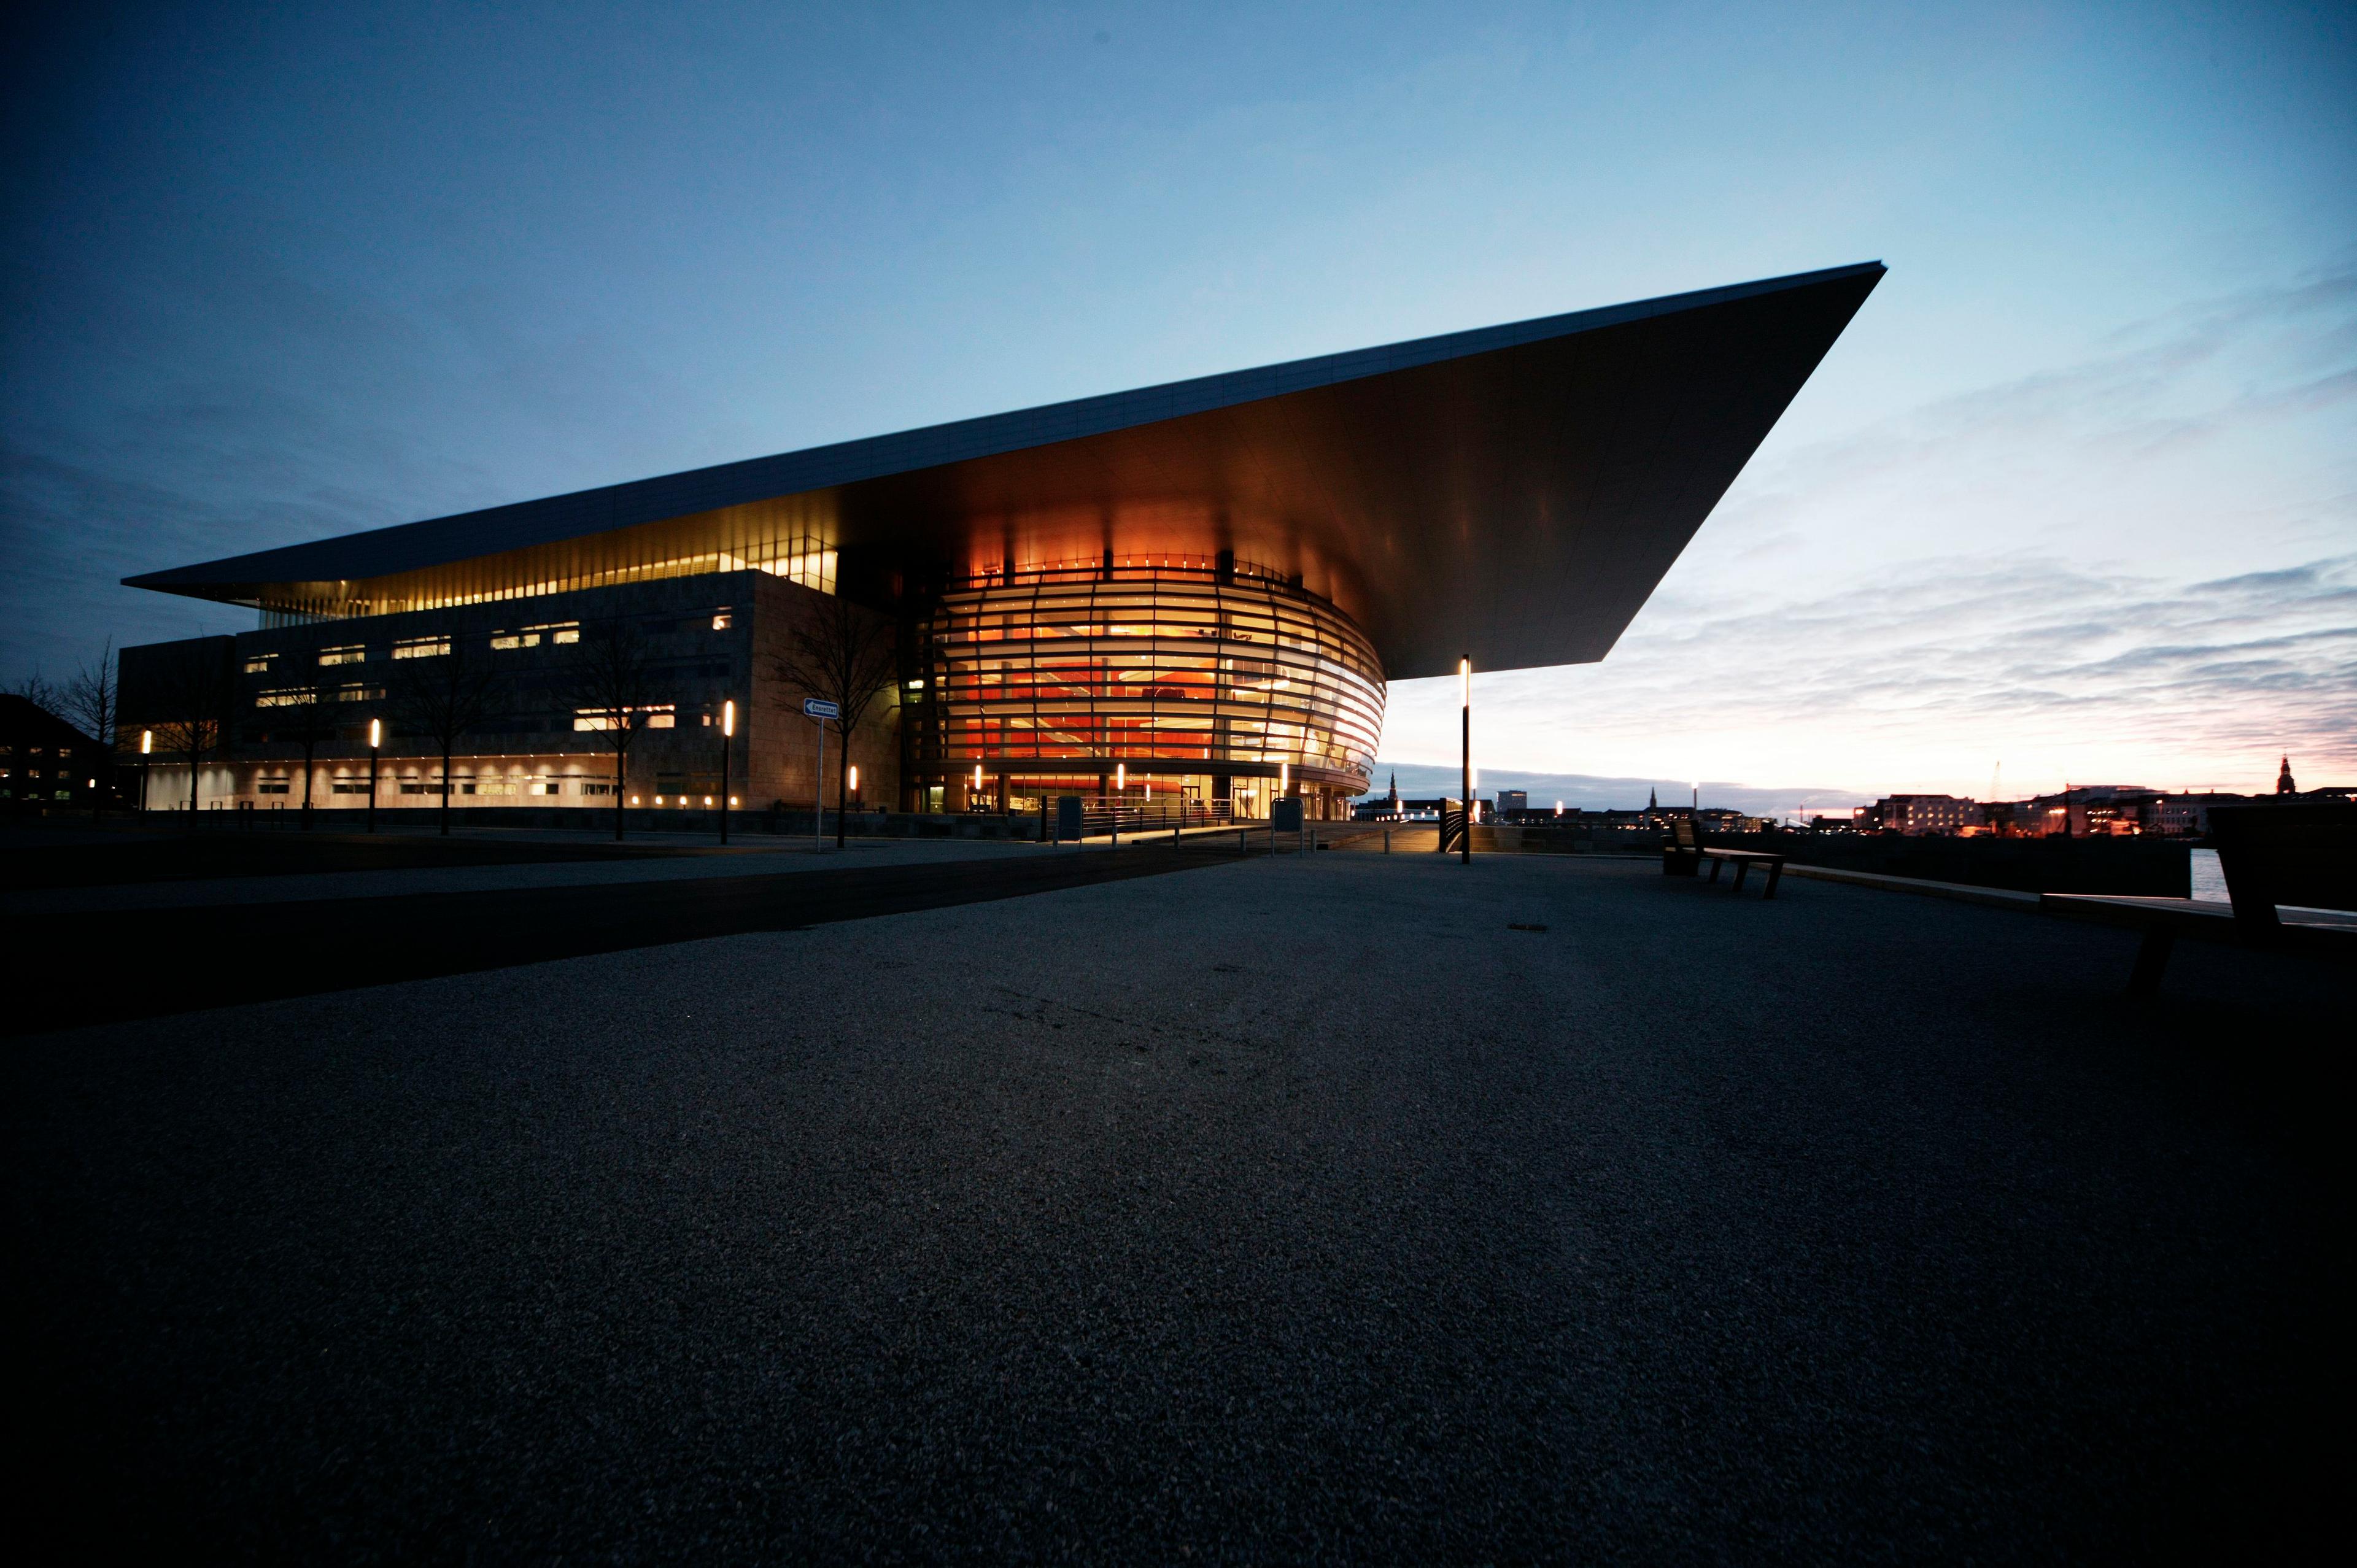 Cover image of this place Copenhagen Opera House